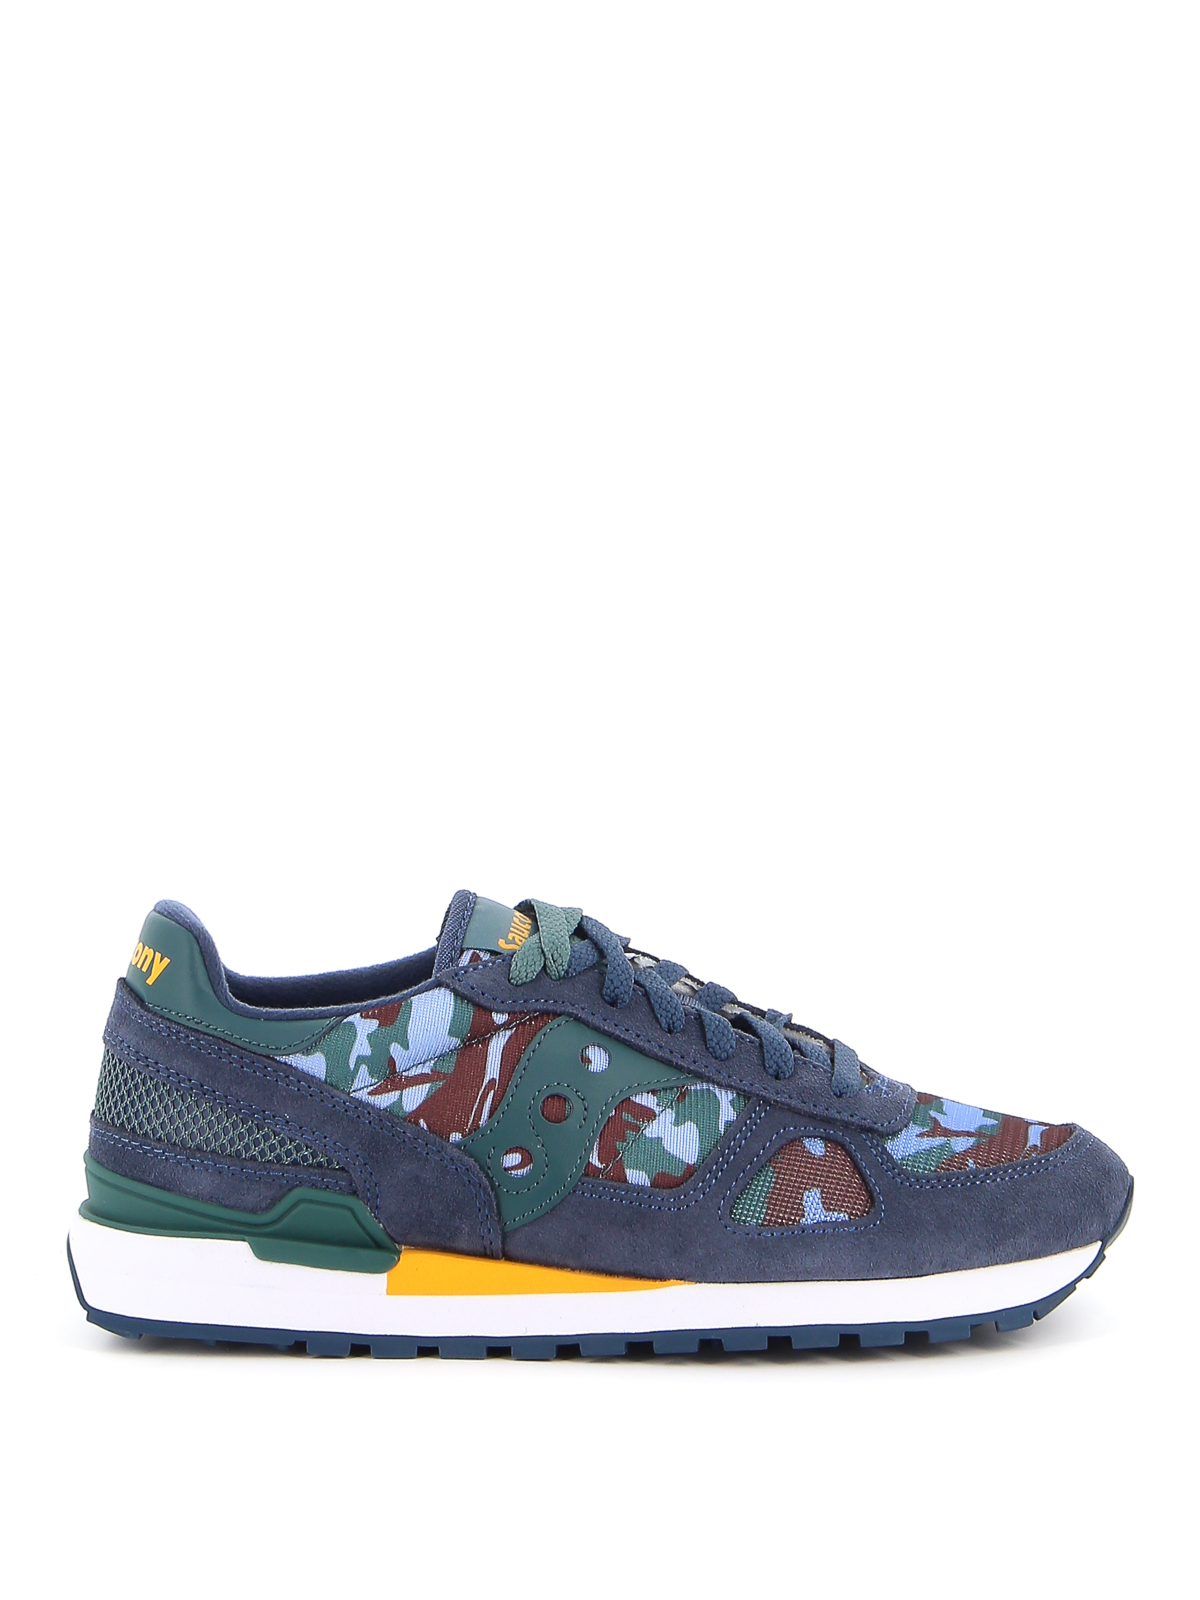 Saucony - Shadow Original camouflage sneakers - trainers - 2108761